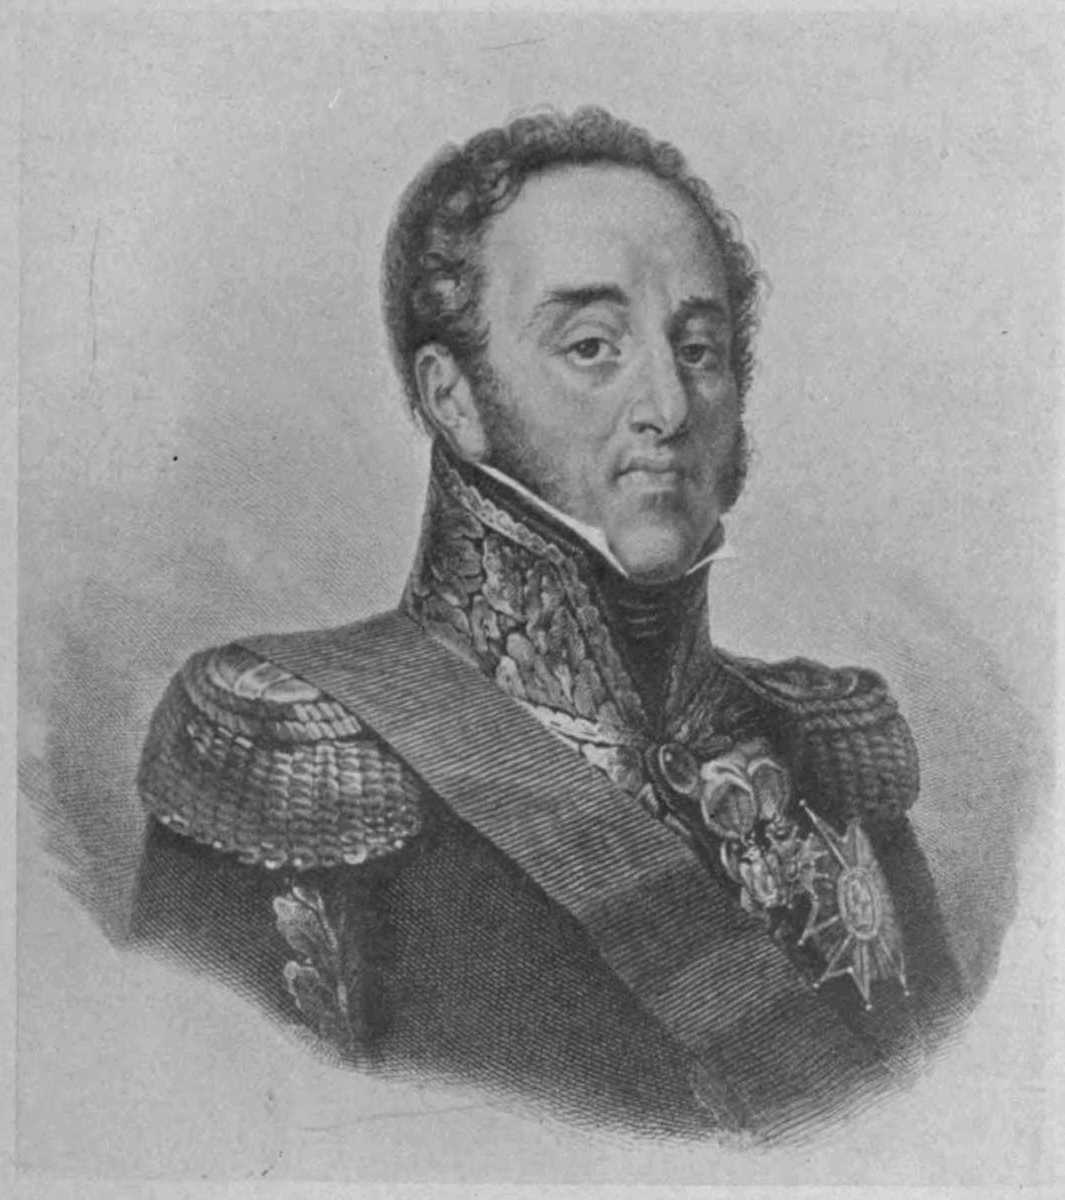 An engraving of the The Napoleonic general, Louis-Nicolas Davout News Photo  - Getty Images